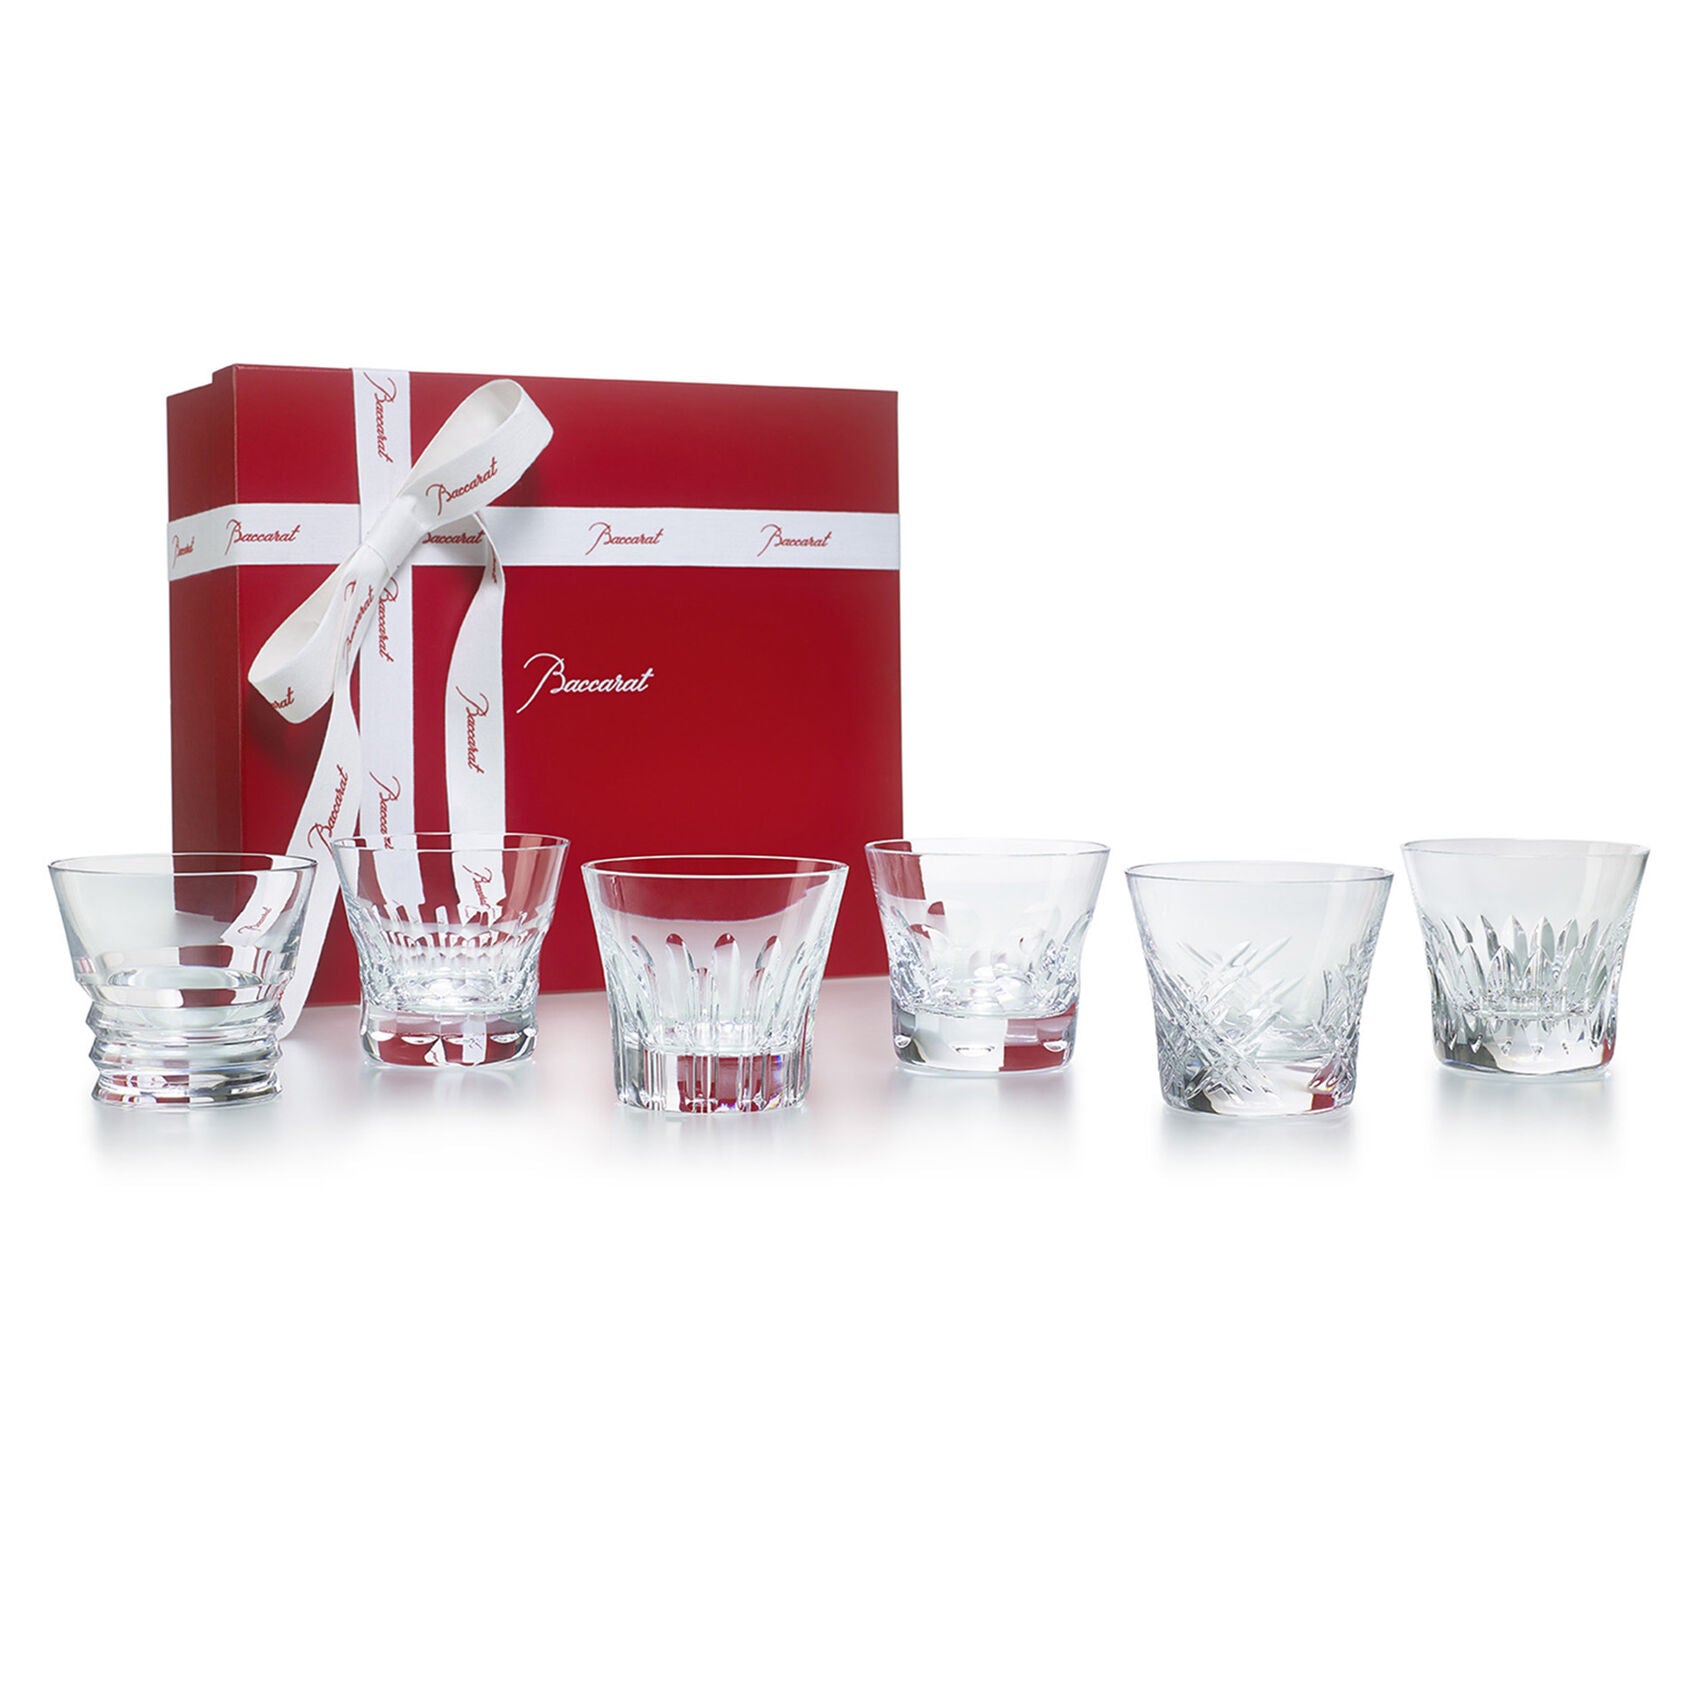 Baccarat Everyday Baccarat Old Fashioned Tumblers, Set of 6